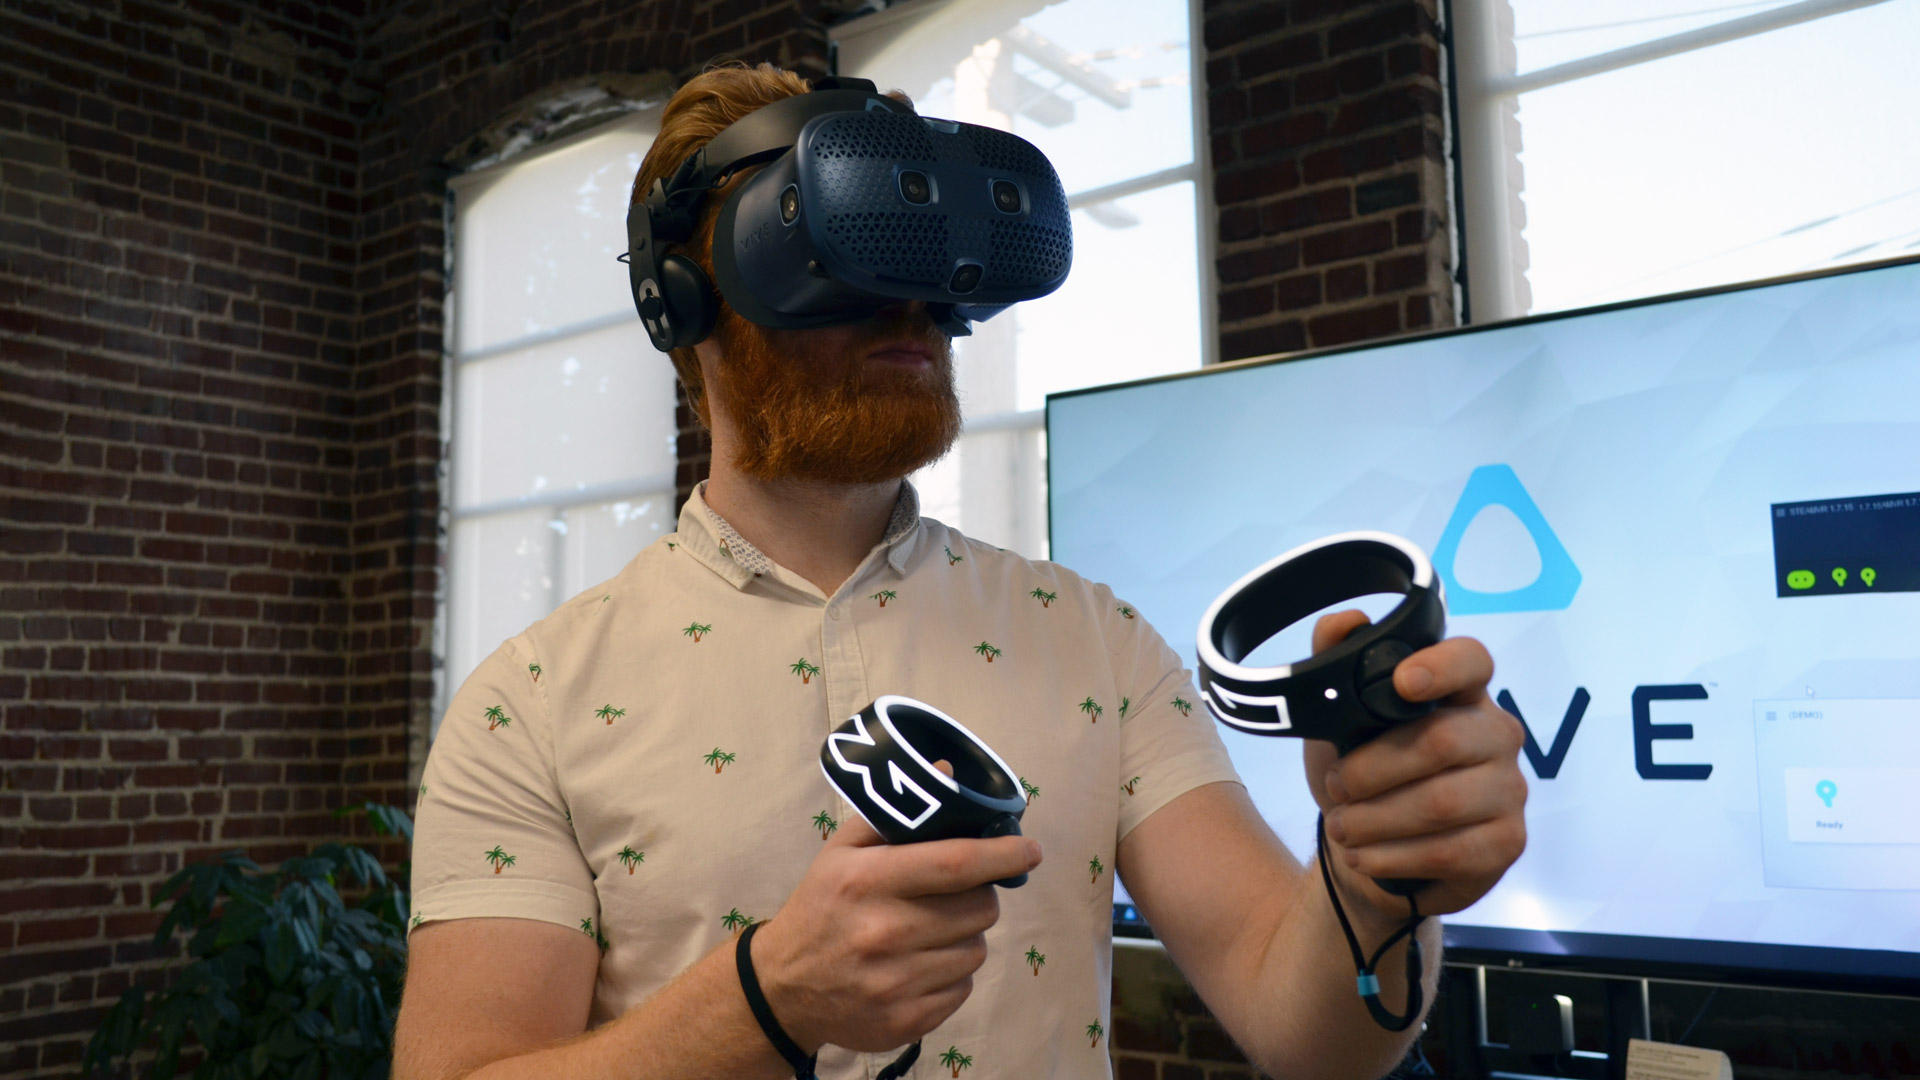 Vive Least Accurate Among Top Headsets in Tracking Test Road to VR